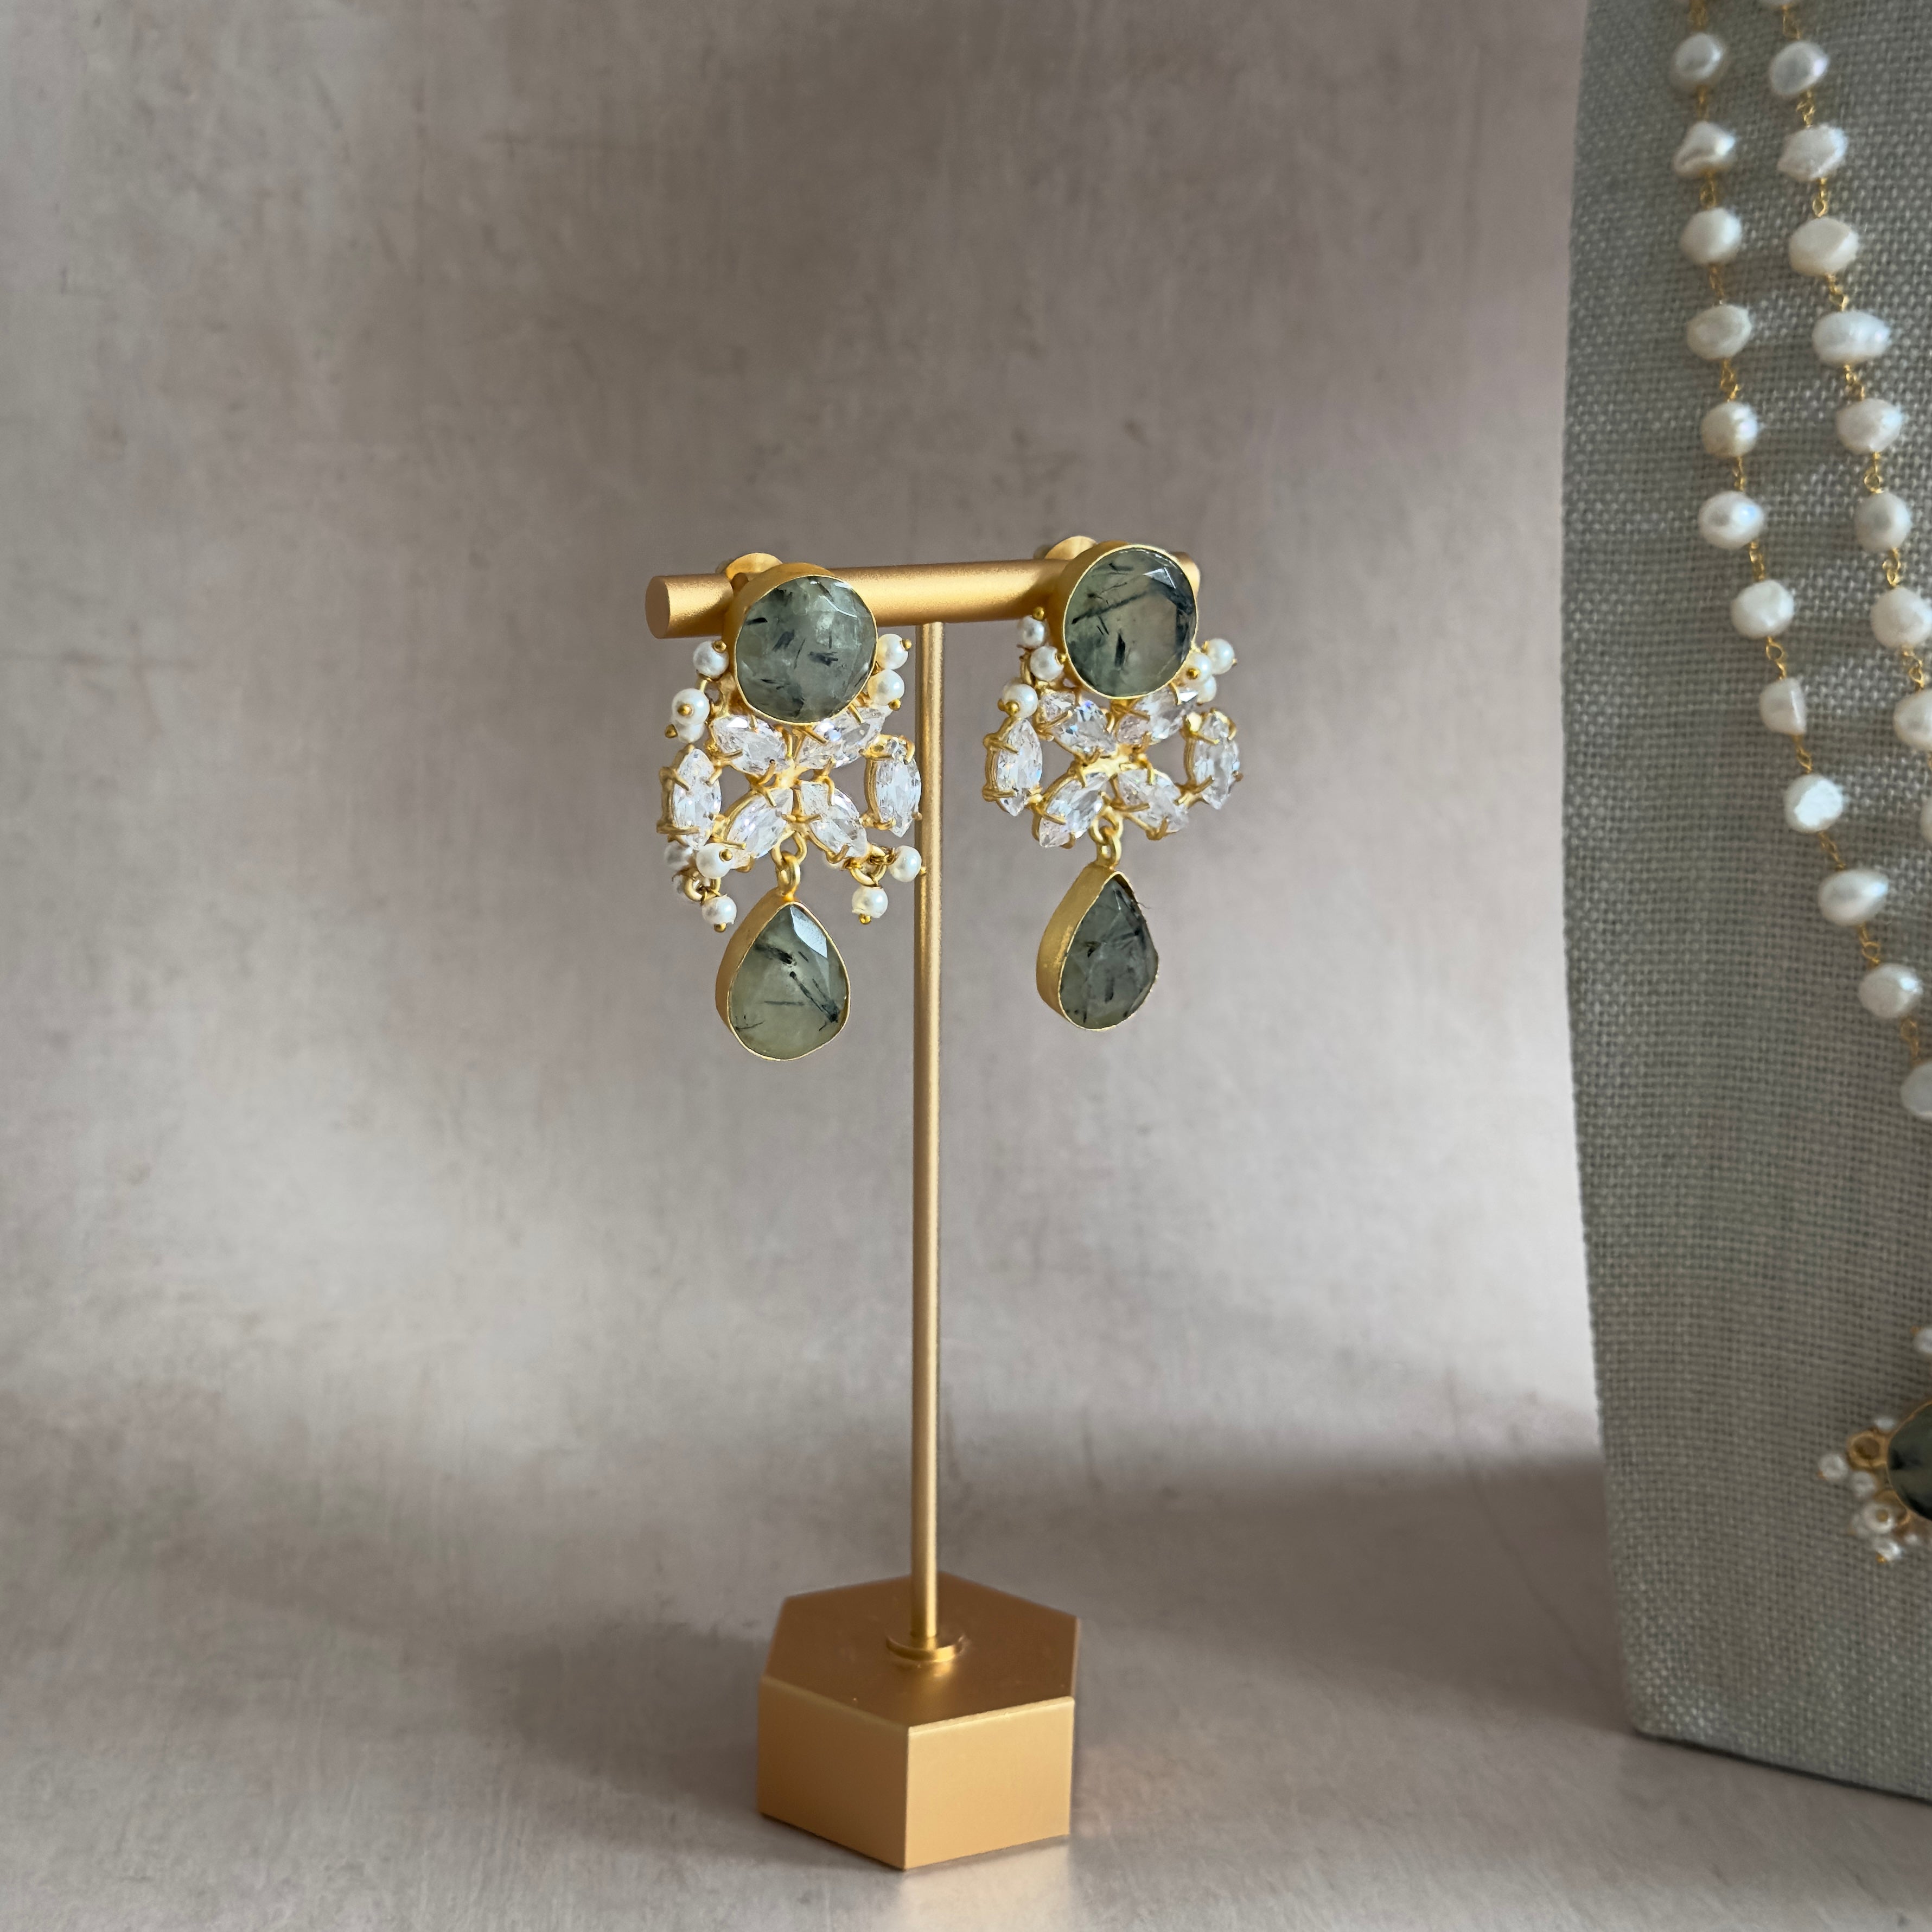 Unleash your inner diva with our Madiha Olive Mala Set! This stunning set features prehnite and CZ crystals that will add a touch of elegance to any outfit. The adjustable chain allows for the perfect fit, it comes complete with matching earrings and tikka. Don't miss out on this must-have accessory!